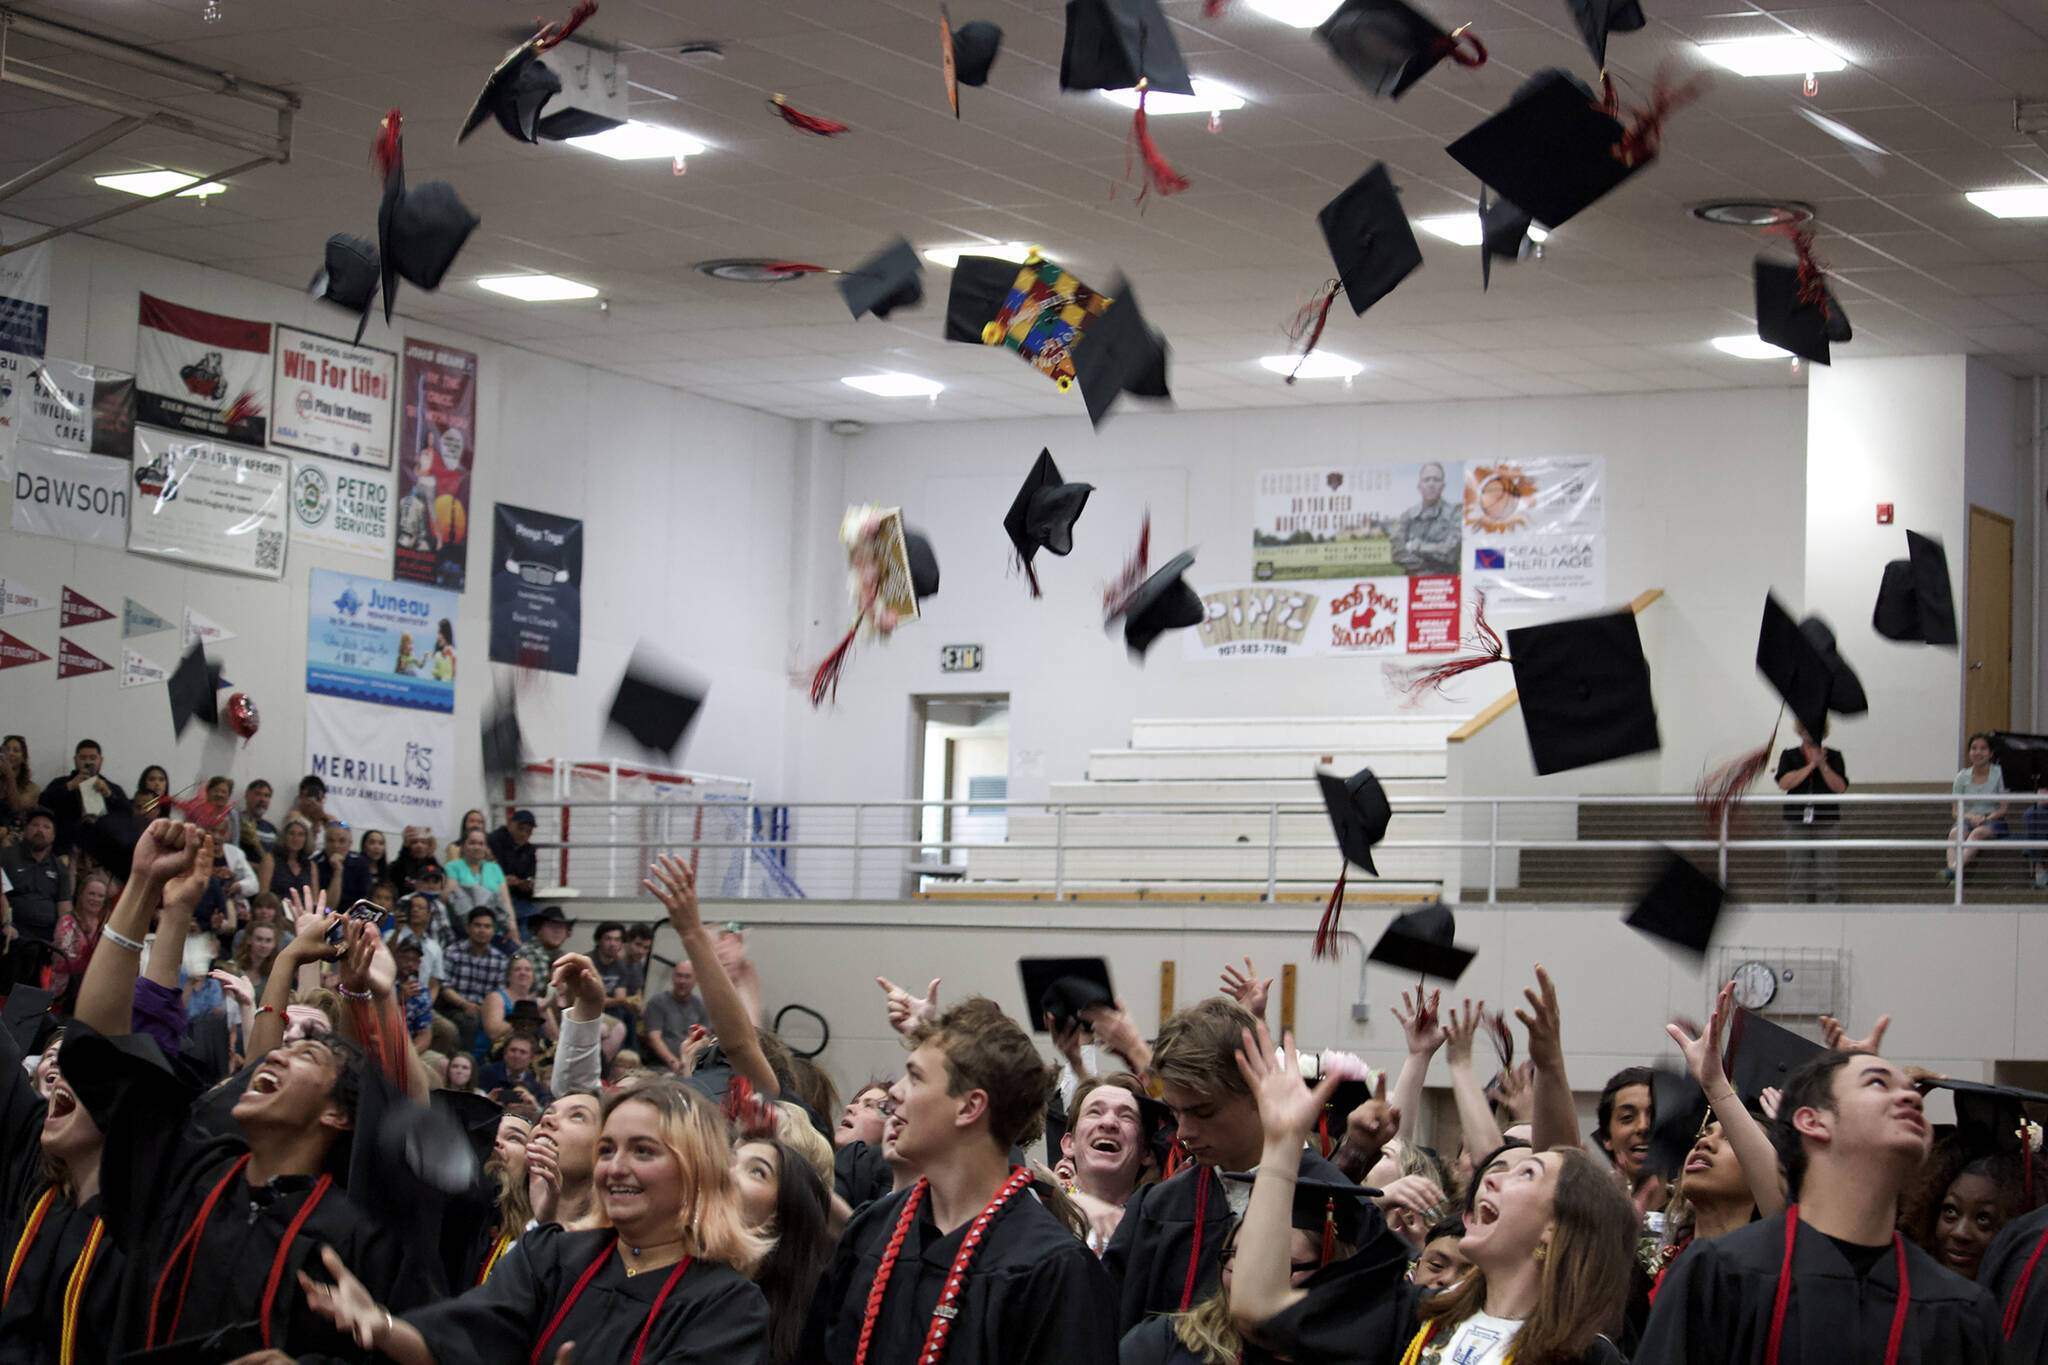 Juneau-Douglas High School: Yadaa.at Kalé graduates toss their caps during graduation last month. The Juneau School District Board of Education approved on Friday a policy formally allowing students to wear cultural regalia during graduation and other significant ceremonies and events. (Mark Sabbatini / Juneau Empire)